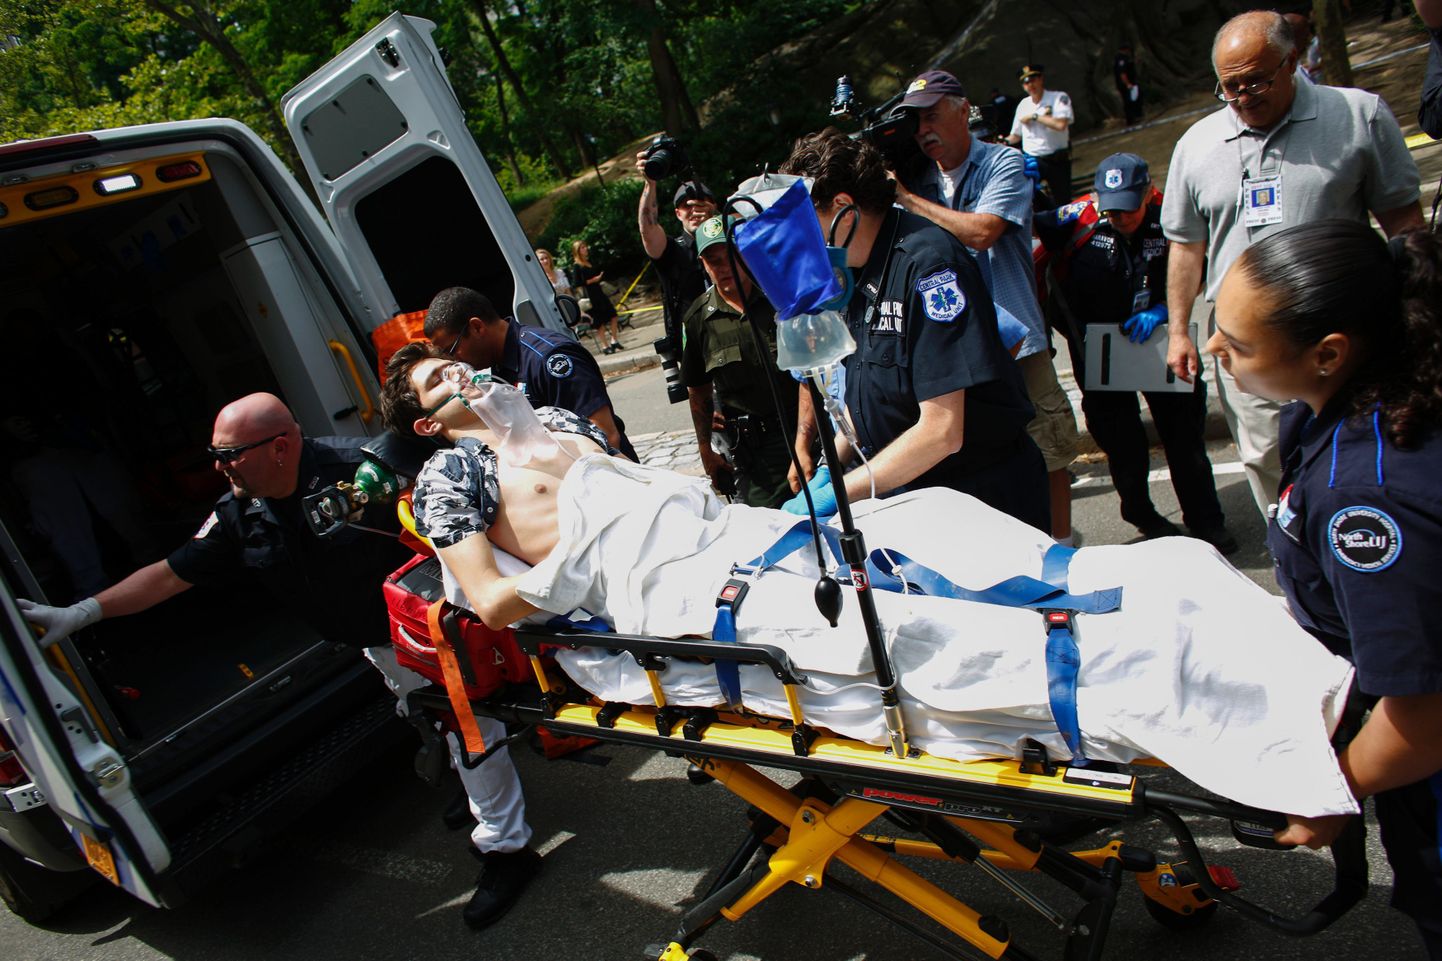 A critically injured man is placed on stretcher into an ambulance after an explosion at Central Park in New York on July 3, 2016.
The New York Police Department (NYPD) said one person was injured. No further details were immediately available.    / AFP PHOTO / KENA BETANCUR